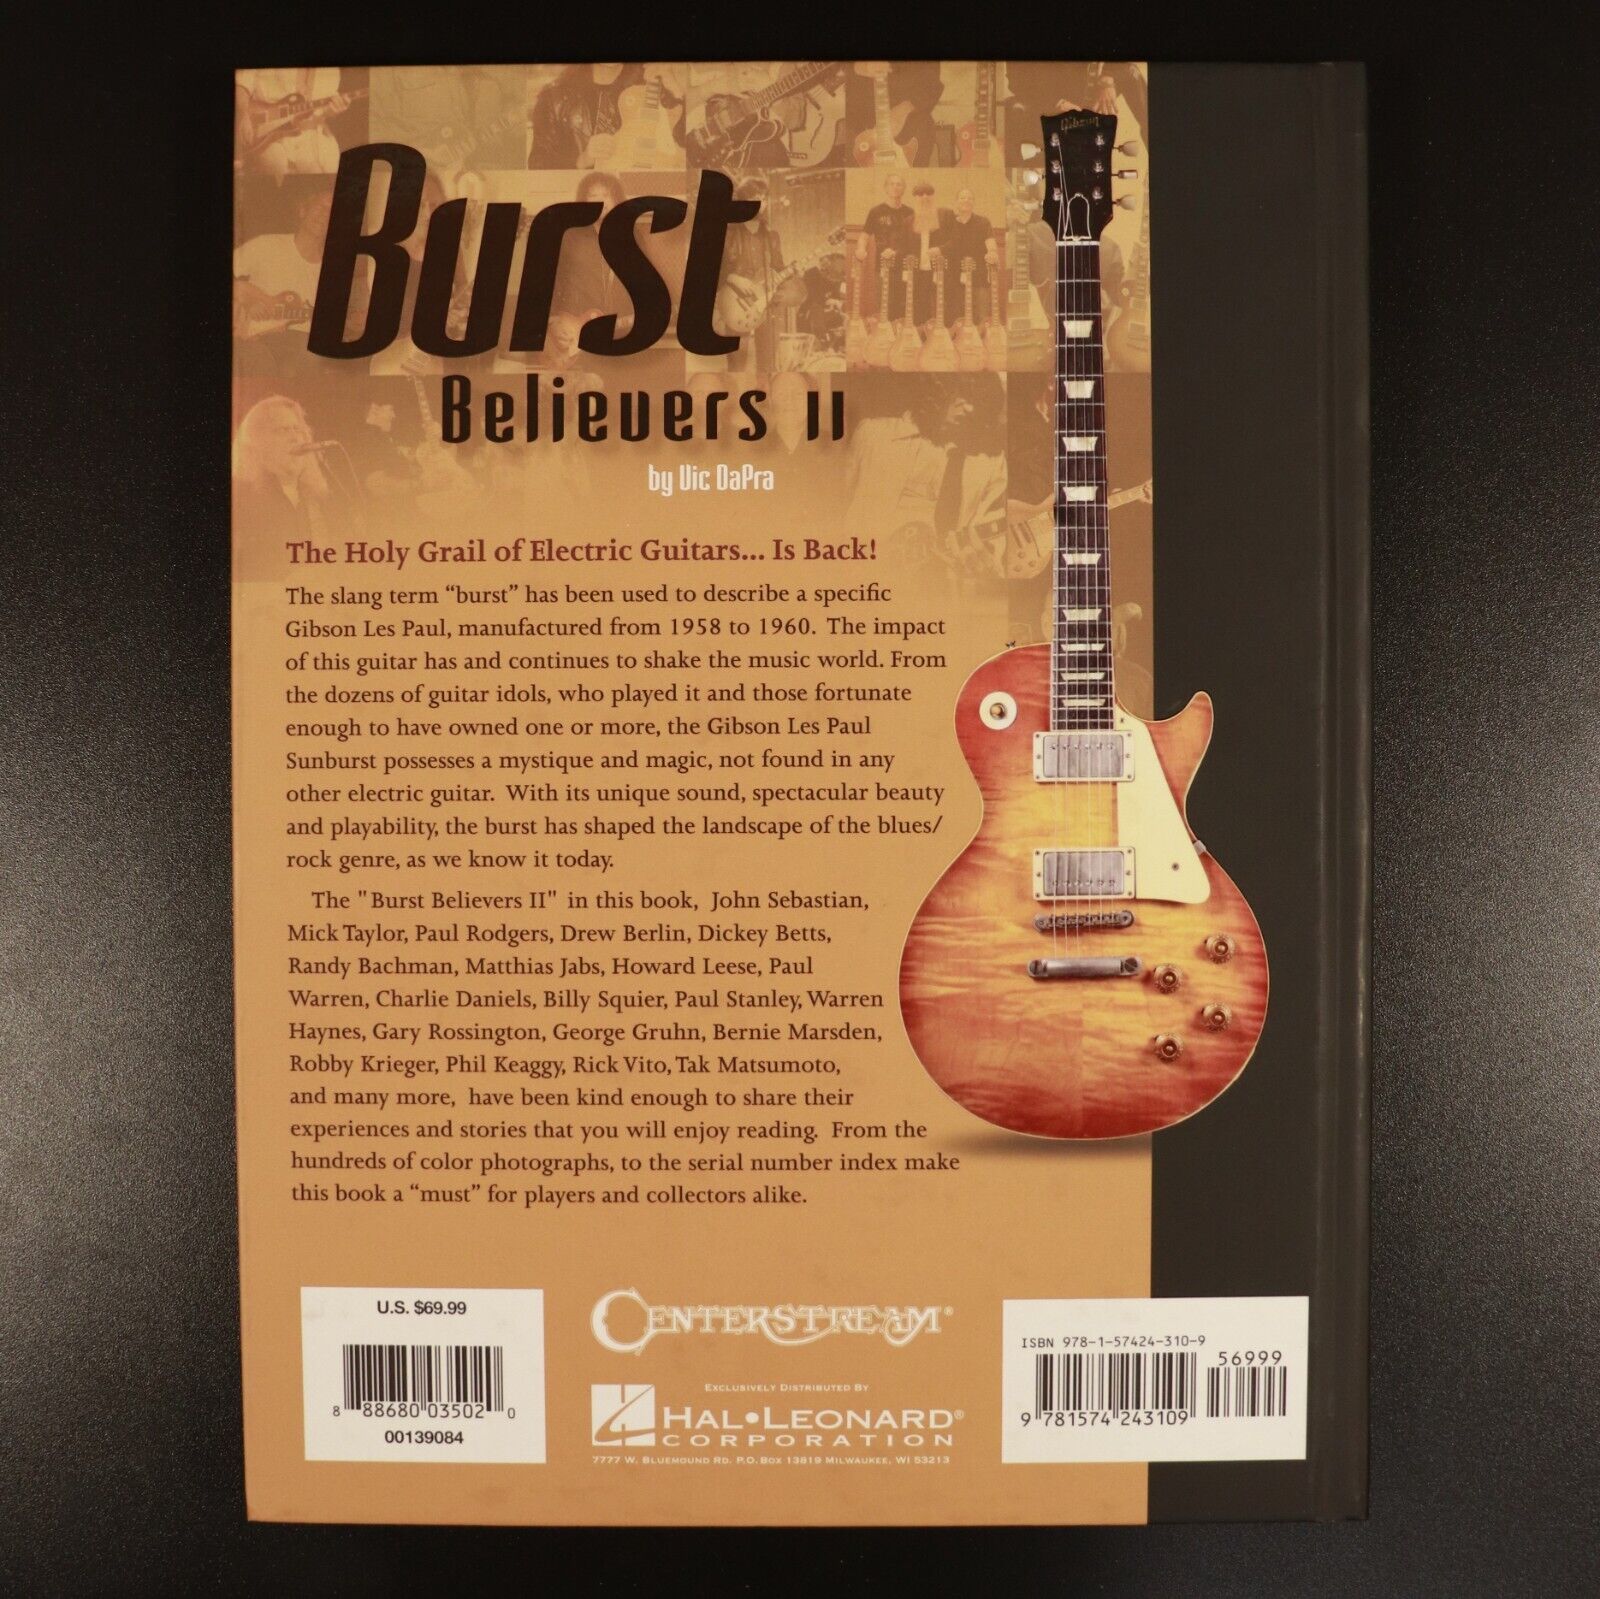 2014 Burst Believers 2 by Vic DaPra 1st Edition Gibson Les Paul Guitar Book - 0